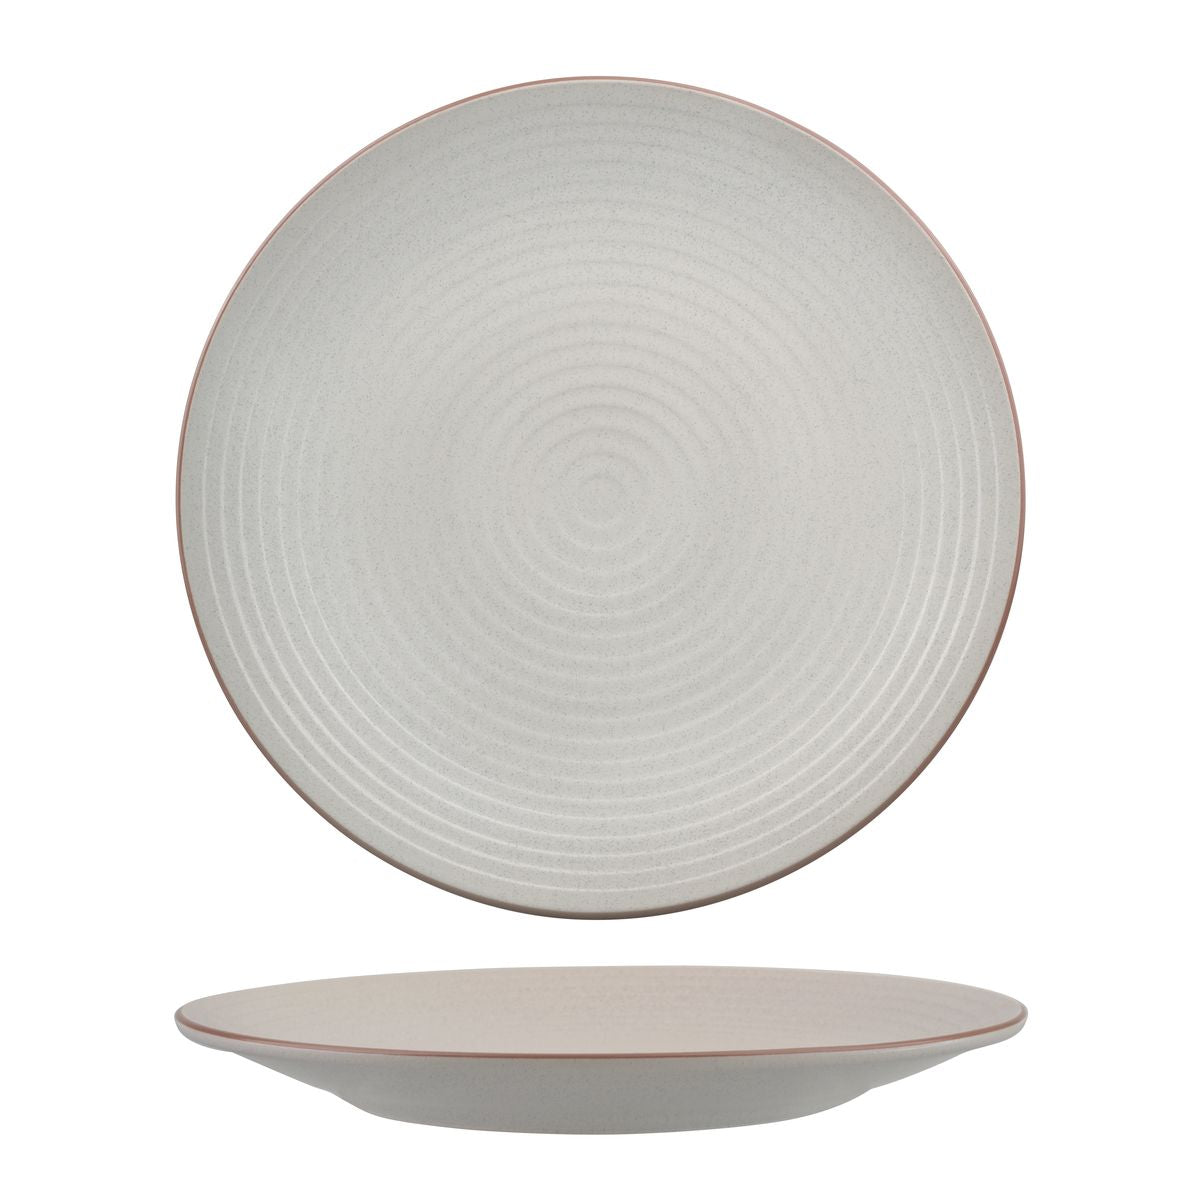 Coupe Plate - Ribbed, 310mm, Zuma Mineral from Zuma. Matt Finish, made out of Ceramic and sold in boxes of 3. Hospitality quality at wholesale price with The Flying Fork! 